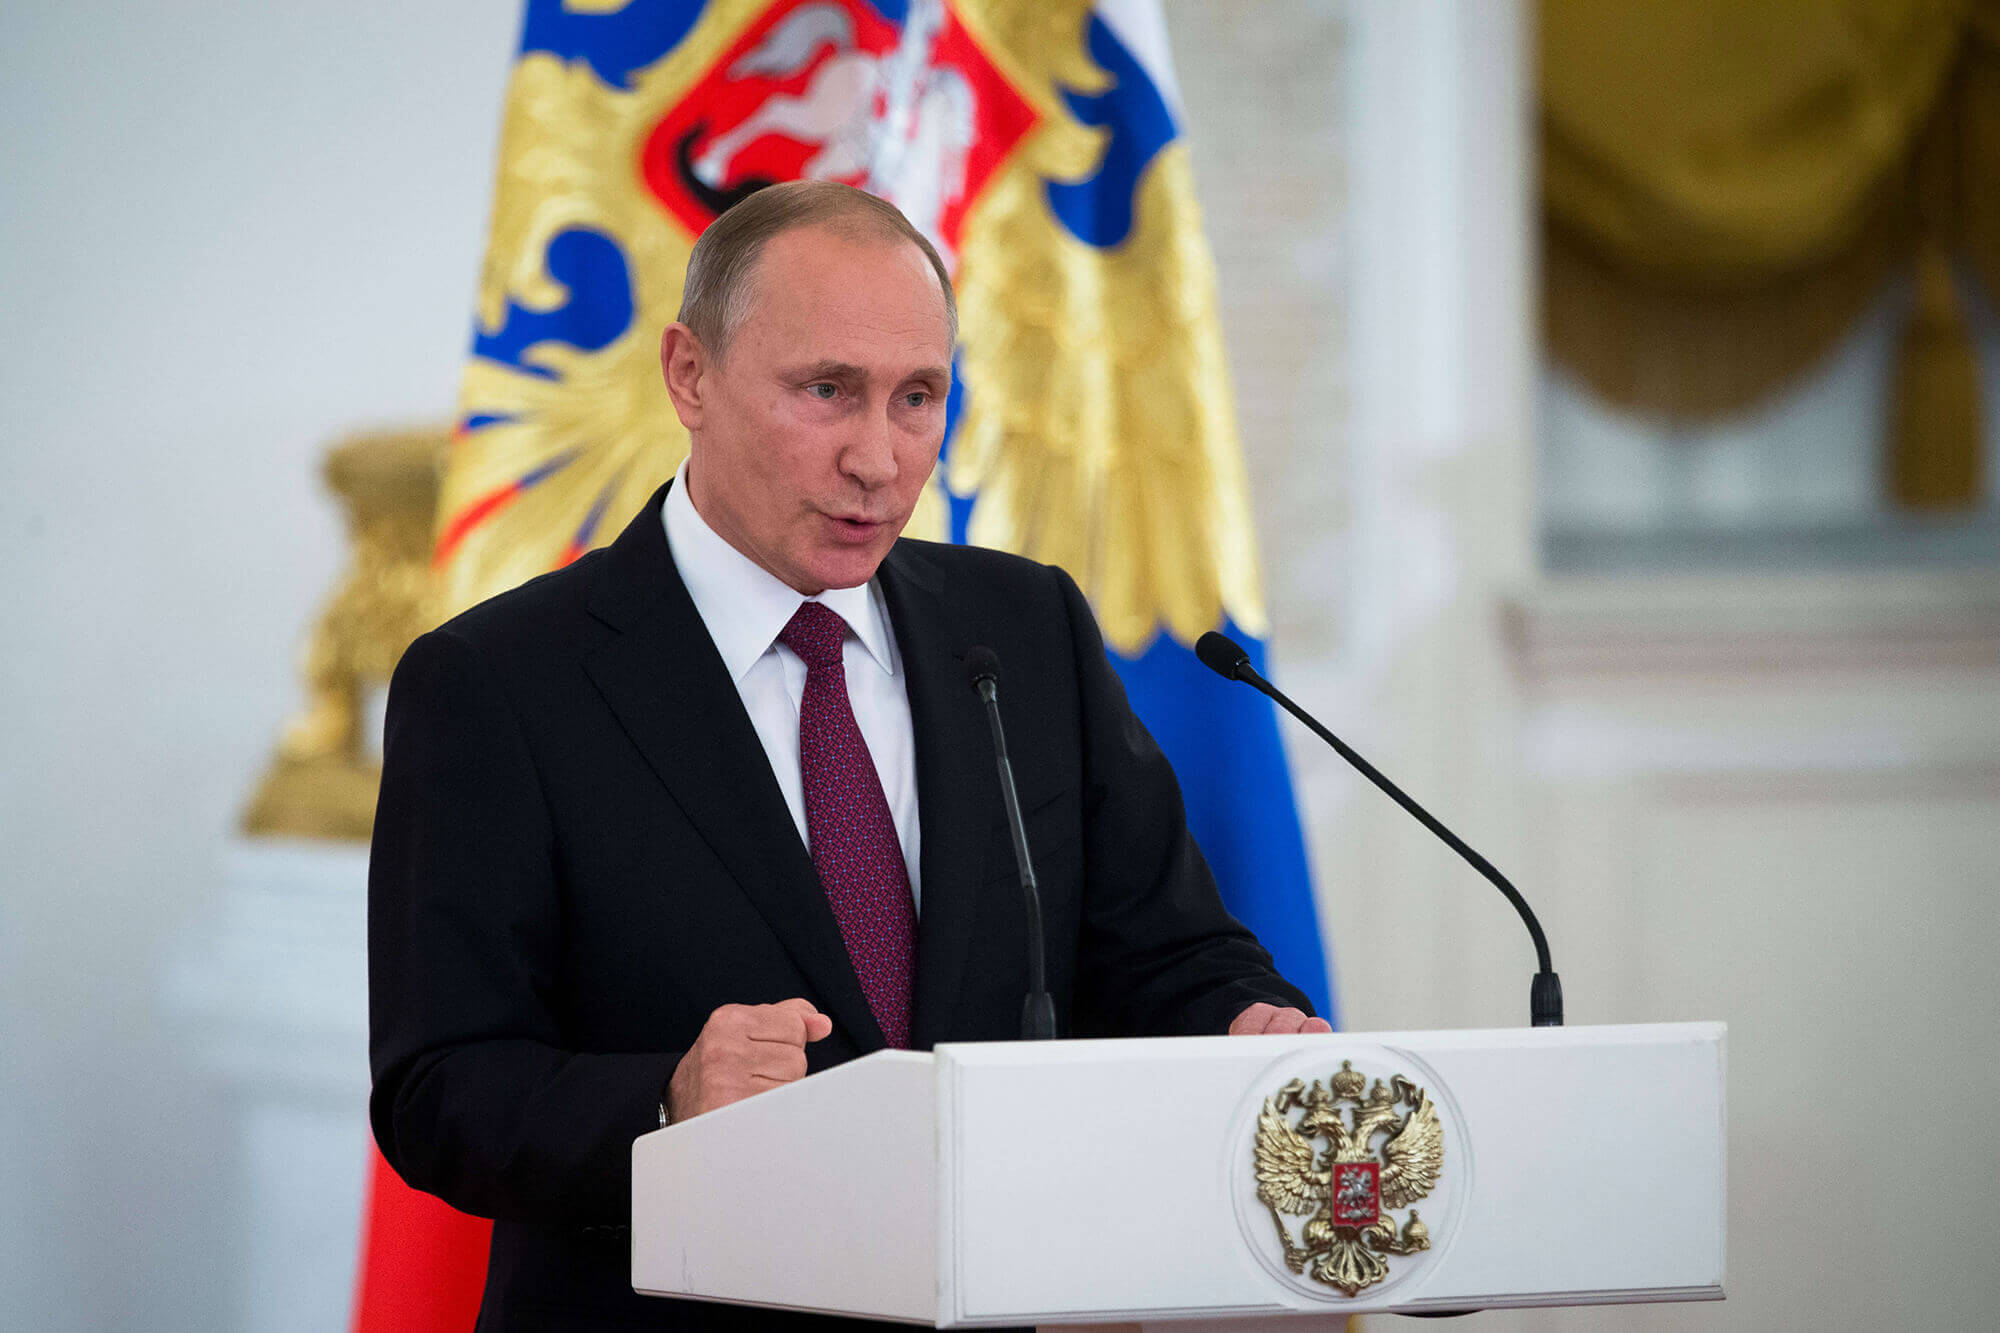 Image of Putin speaking at a conference